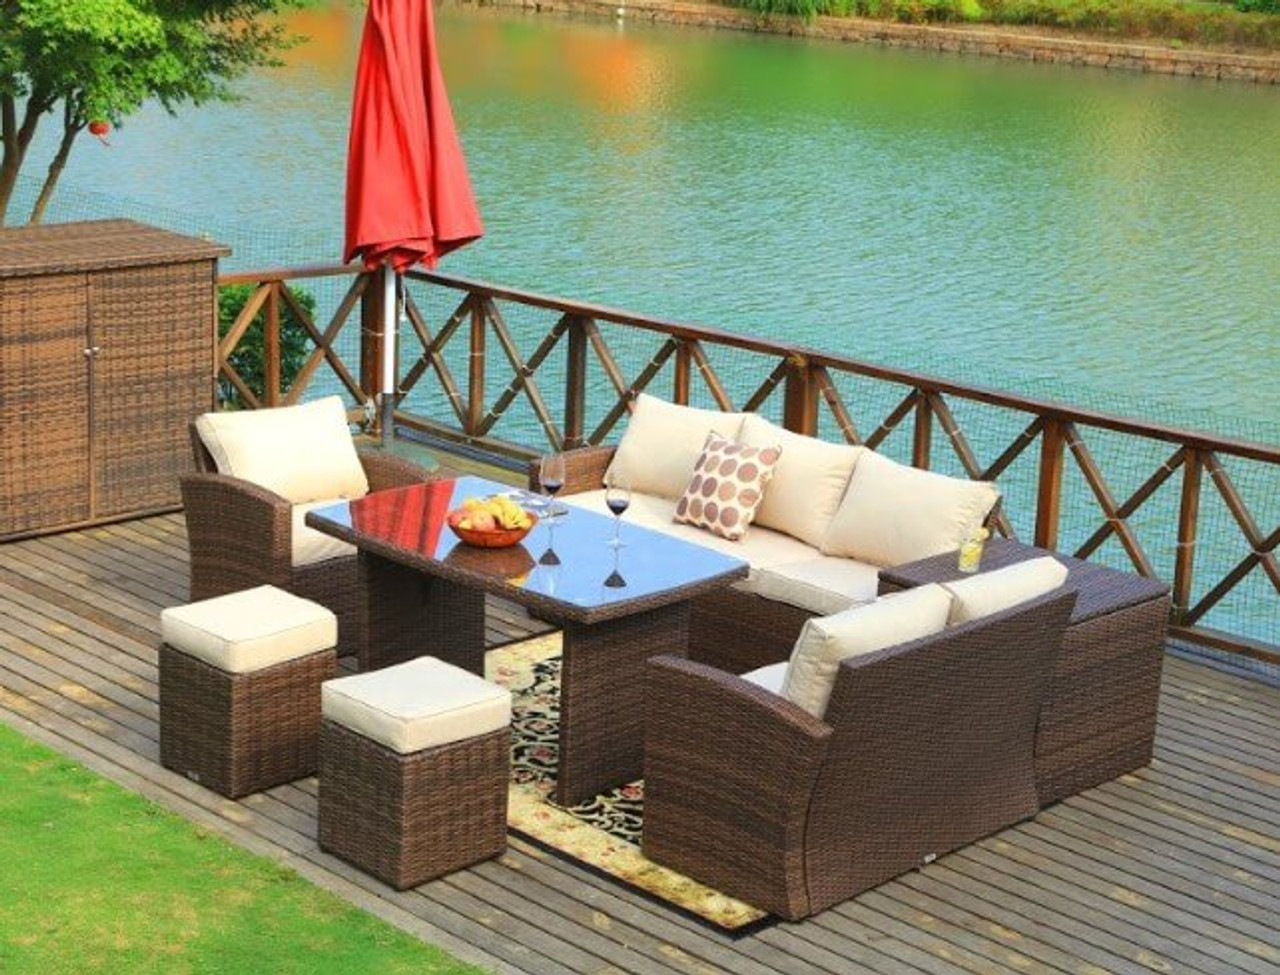 7-Piece Steel Outdoor Sectional Sofa Set with Ottomans and Storage Box